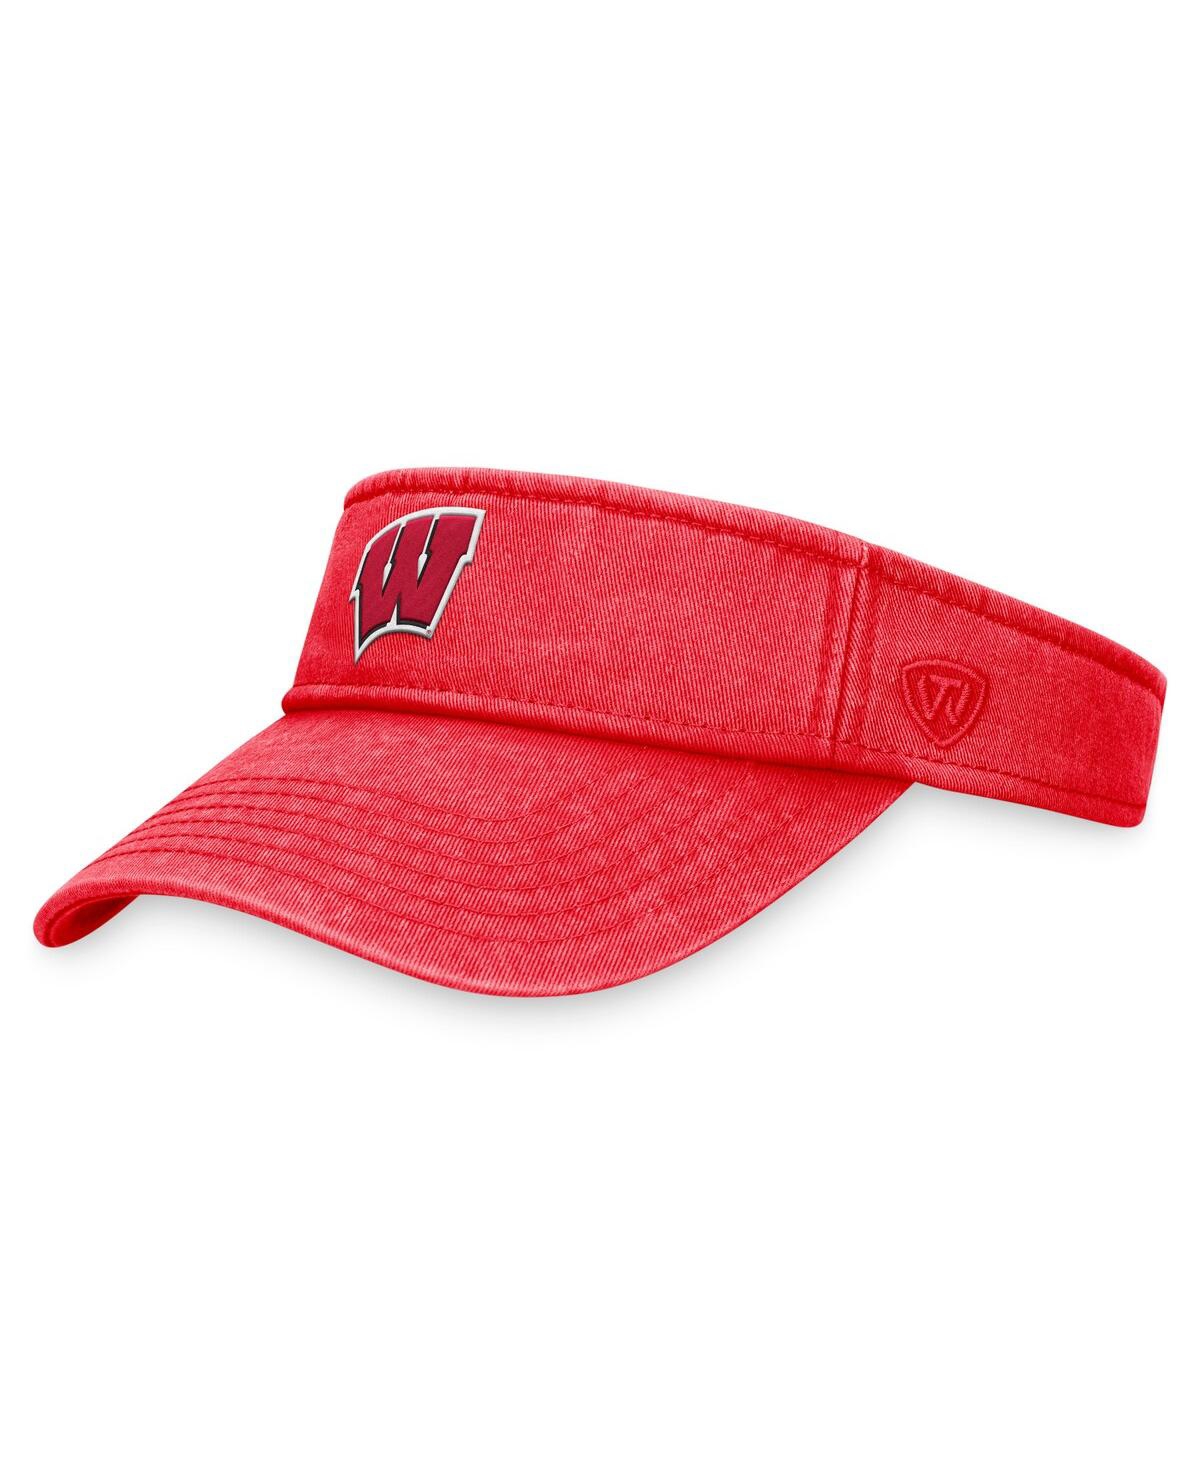 Men's Top of the World Red Wisconsin Badgers Terry Adjustable Visor - Red